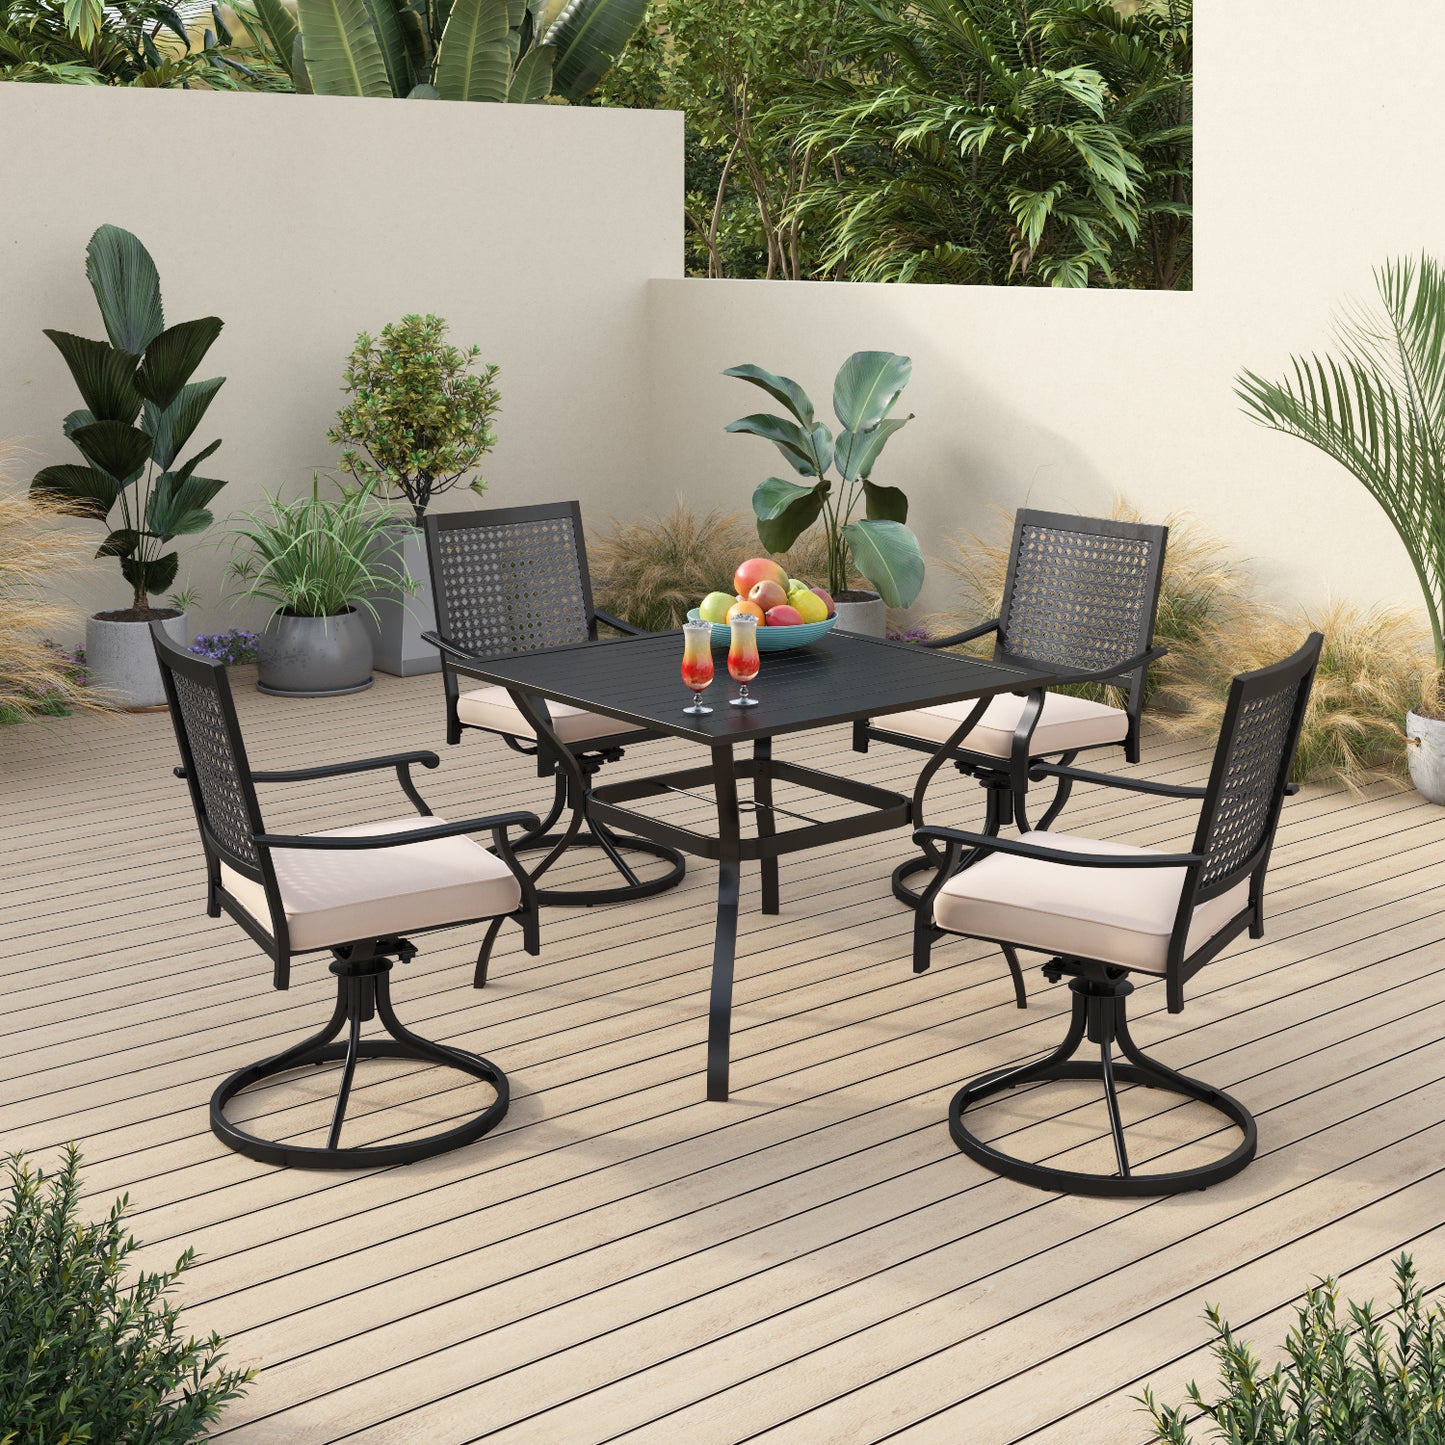 Sophia & William 5 Piece Outdoor Patio Dining Set 4 Patio Dining Swivel Chairs and 37" Square Metal Dining Table